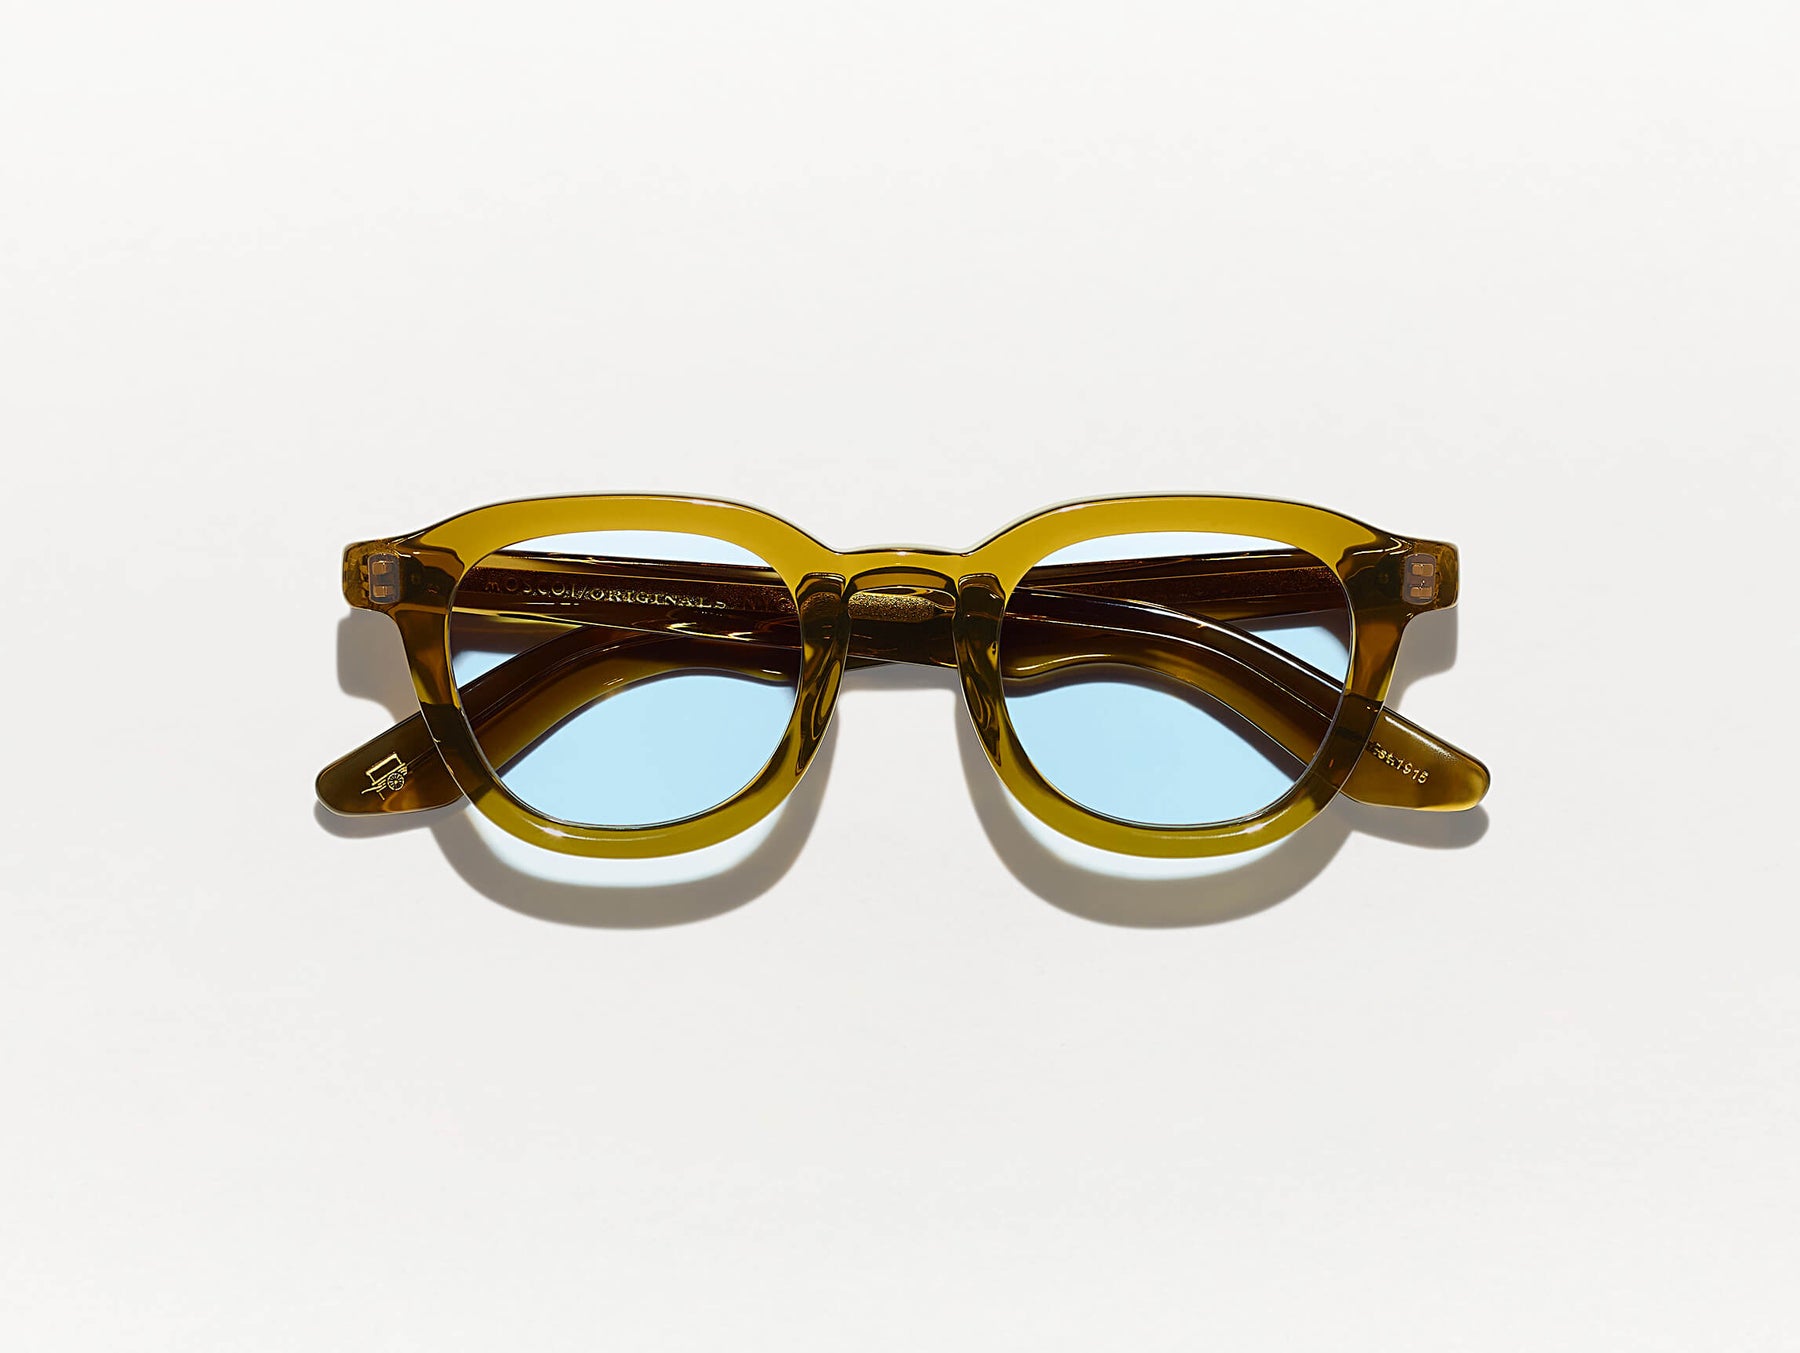 The DAHVEN in Olive Brown with Bel Air Blue Tinted Lenses